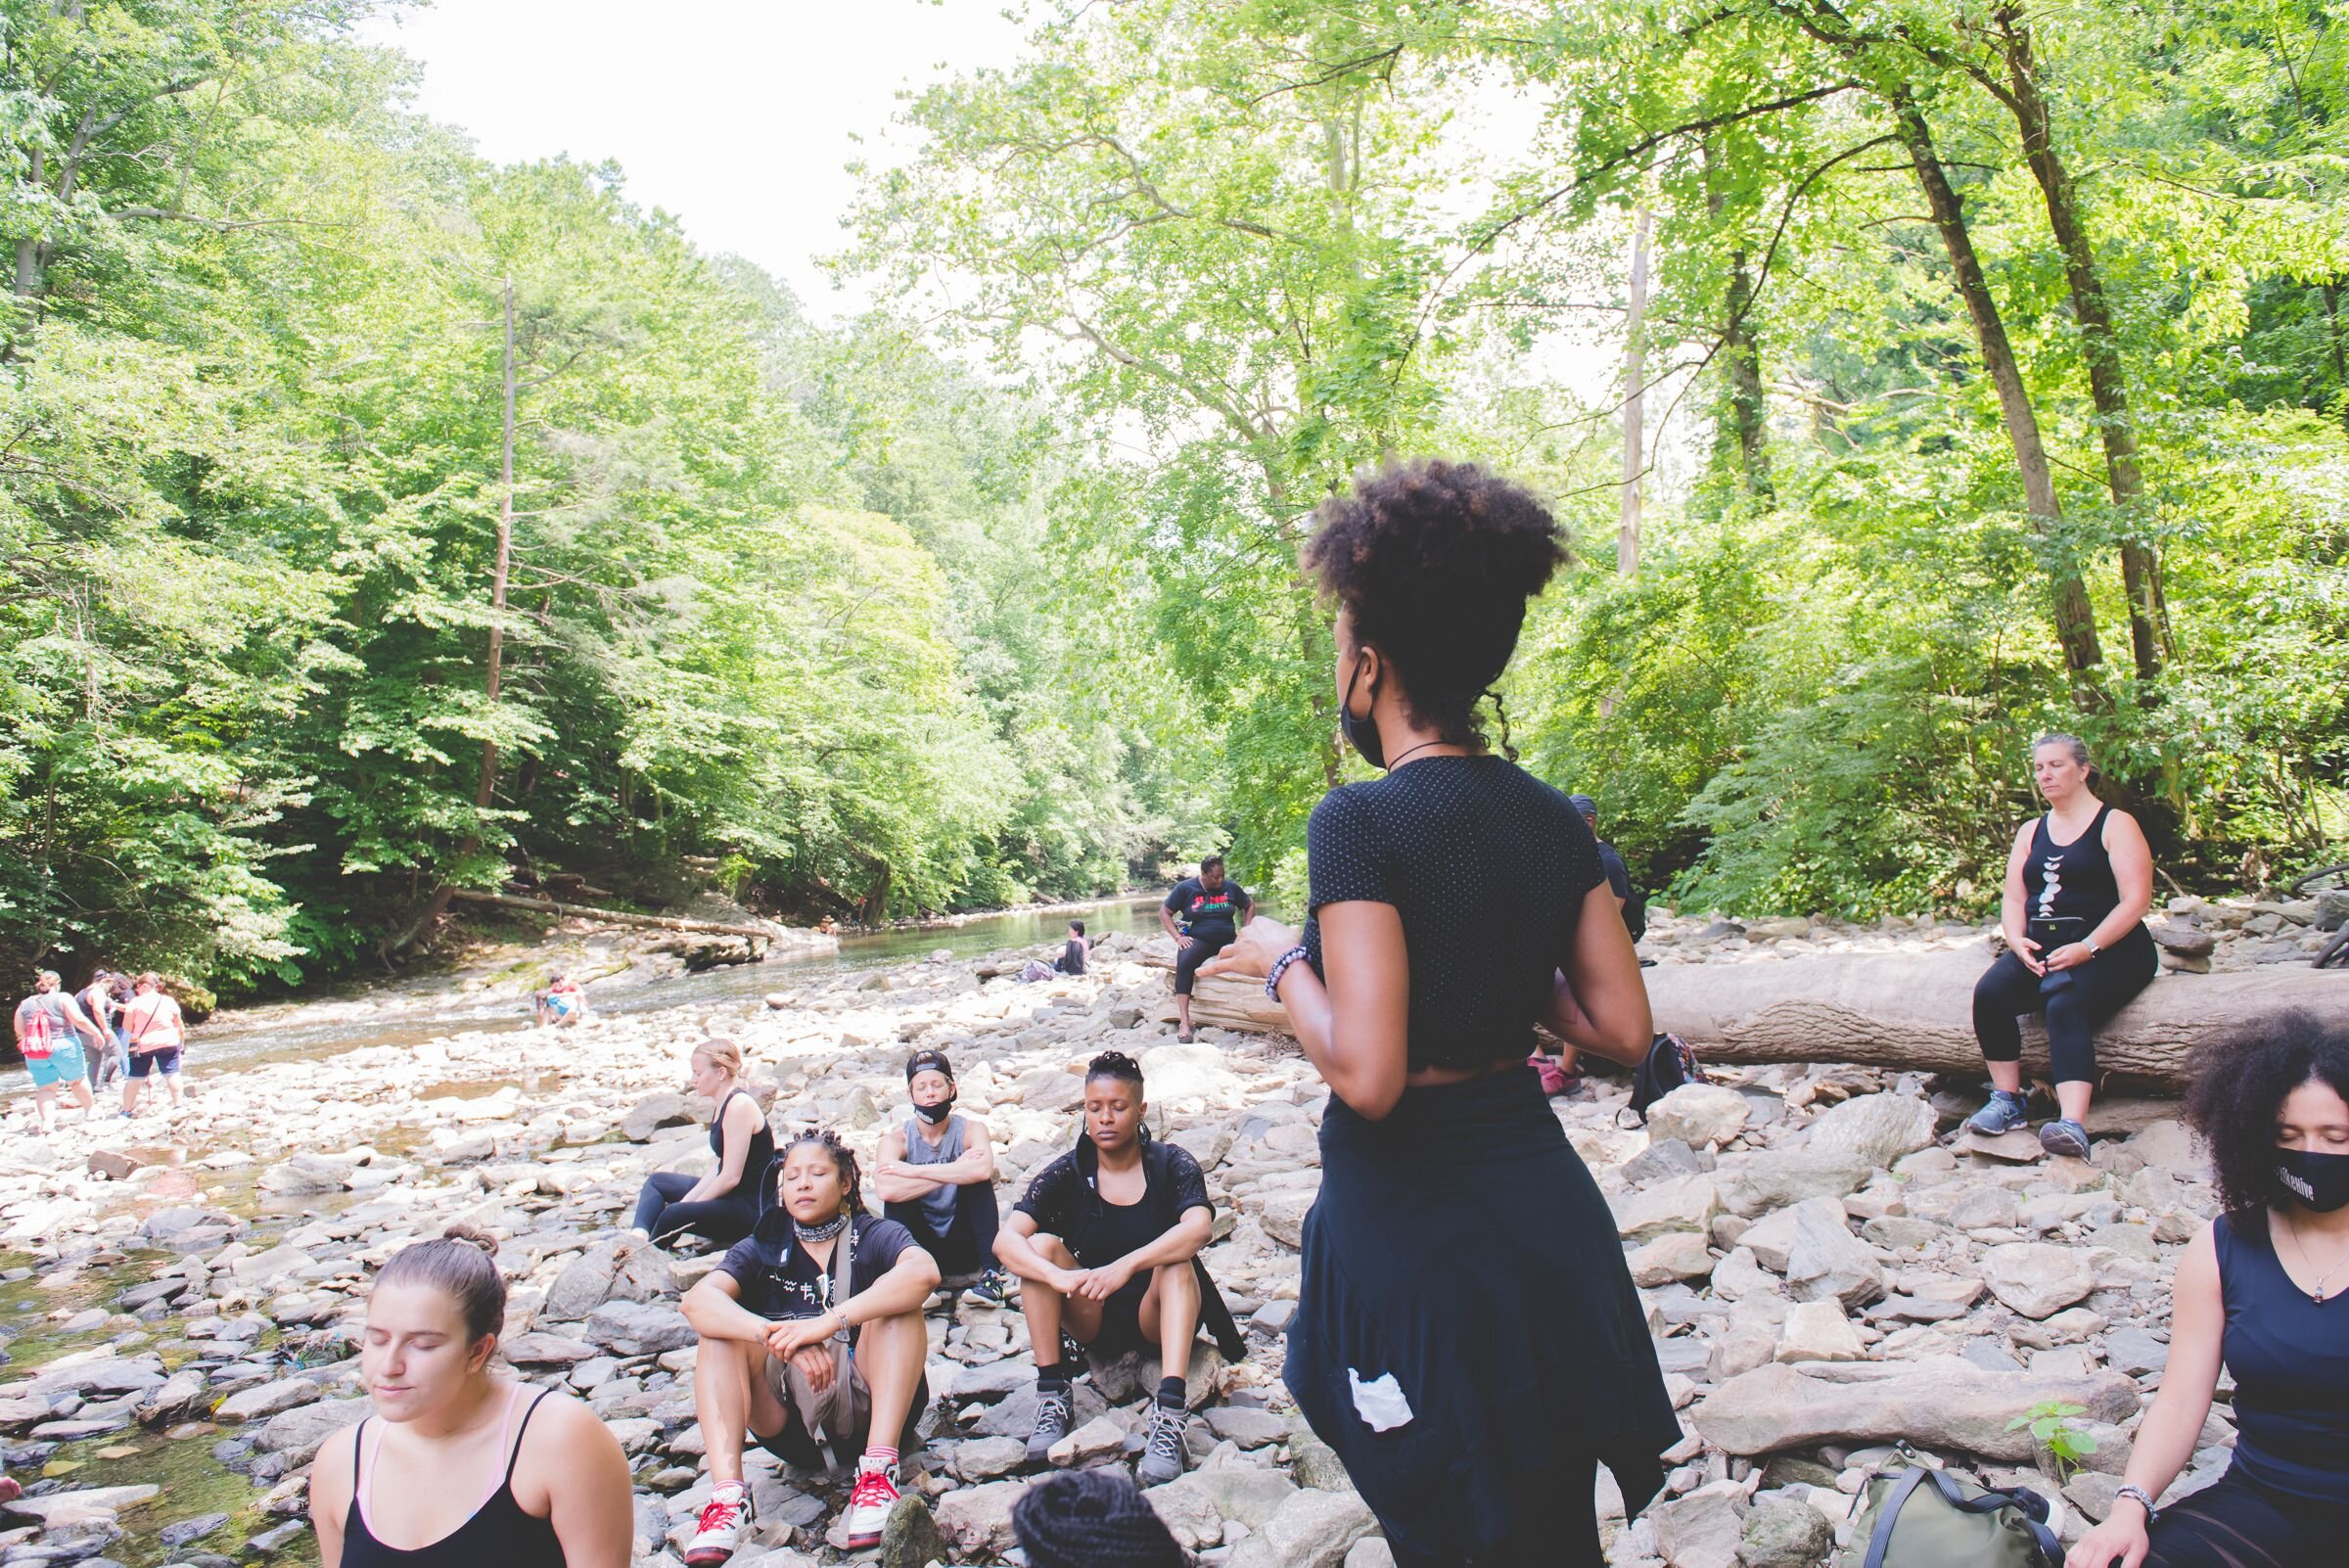 Hike + Heal members meditate beside the Wissahickon Creek. Photographs courtesy of Cathie at BeauMonde Originals.